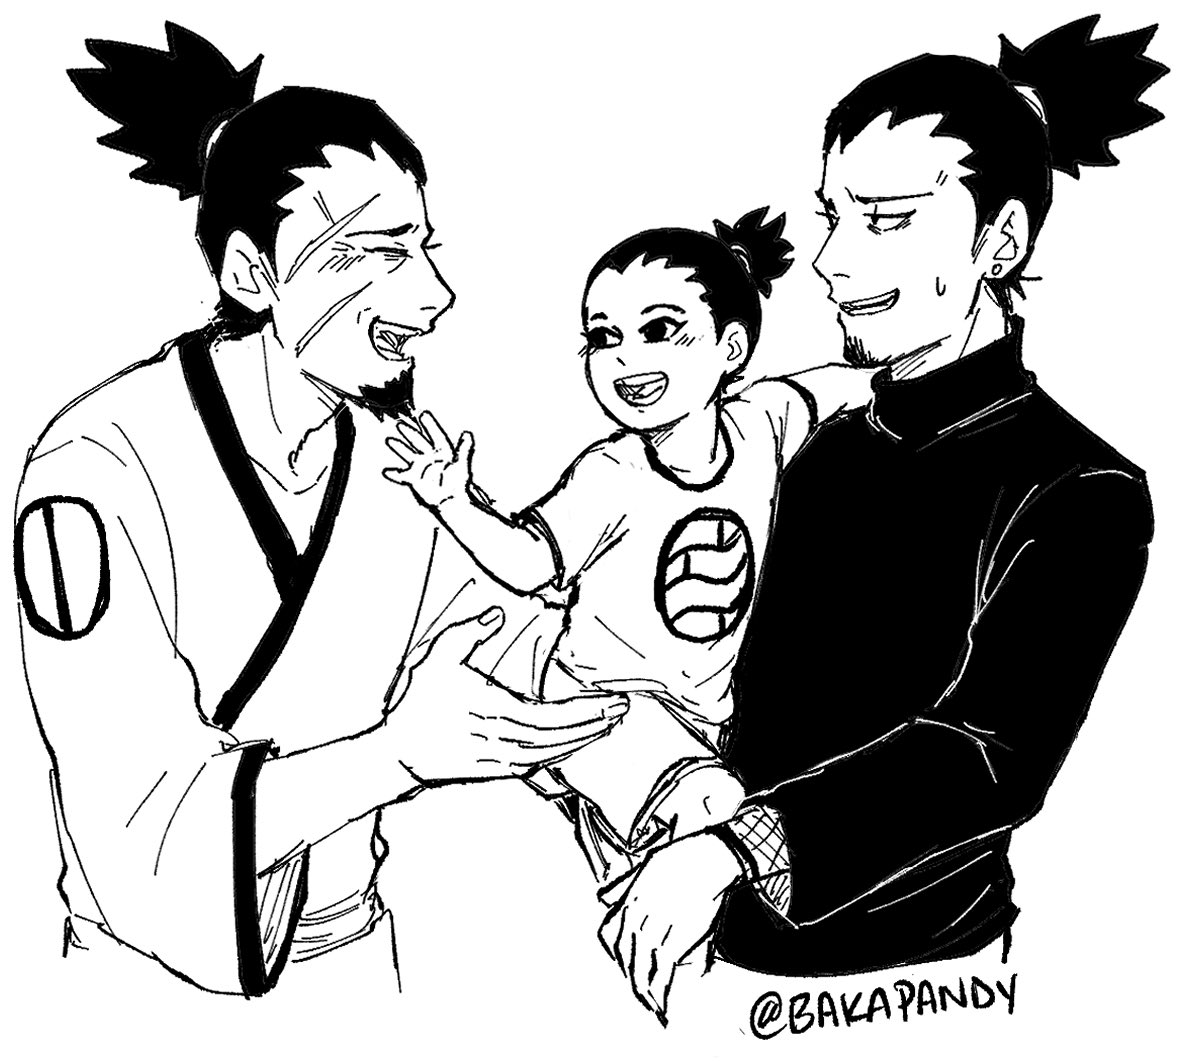 Everyday I think about how we could have had grandpa Shikaku and I get sad about it 